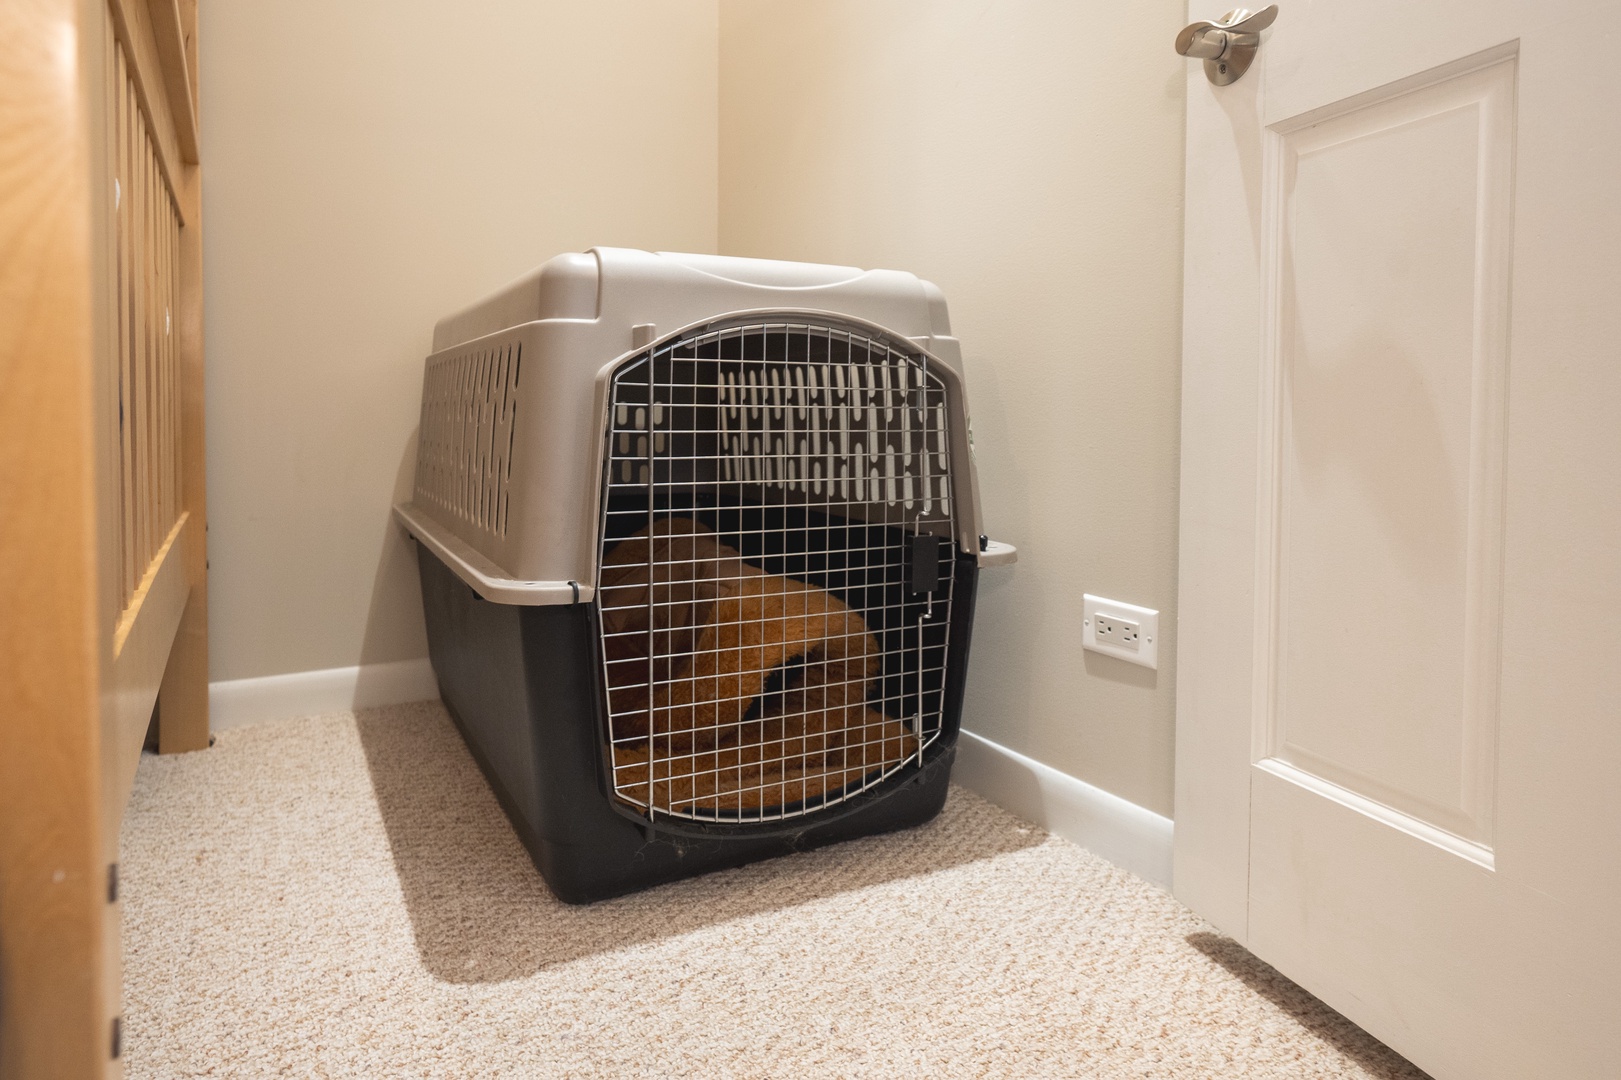 Accommodations are available even for the furbabies!